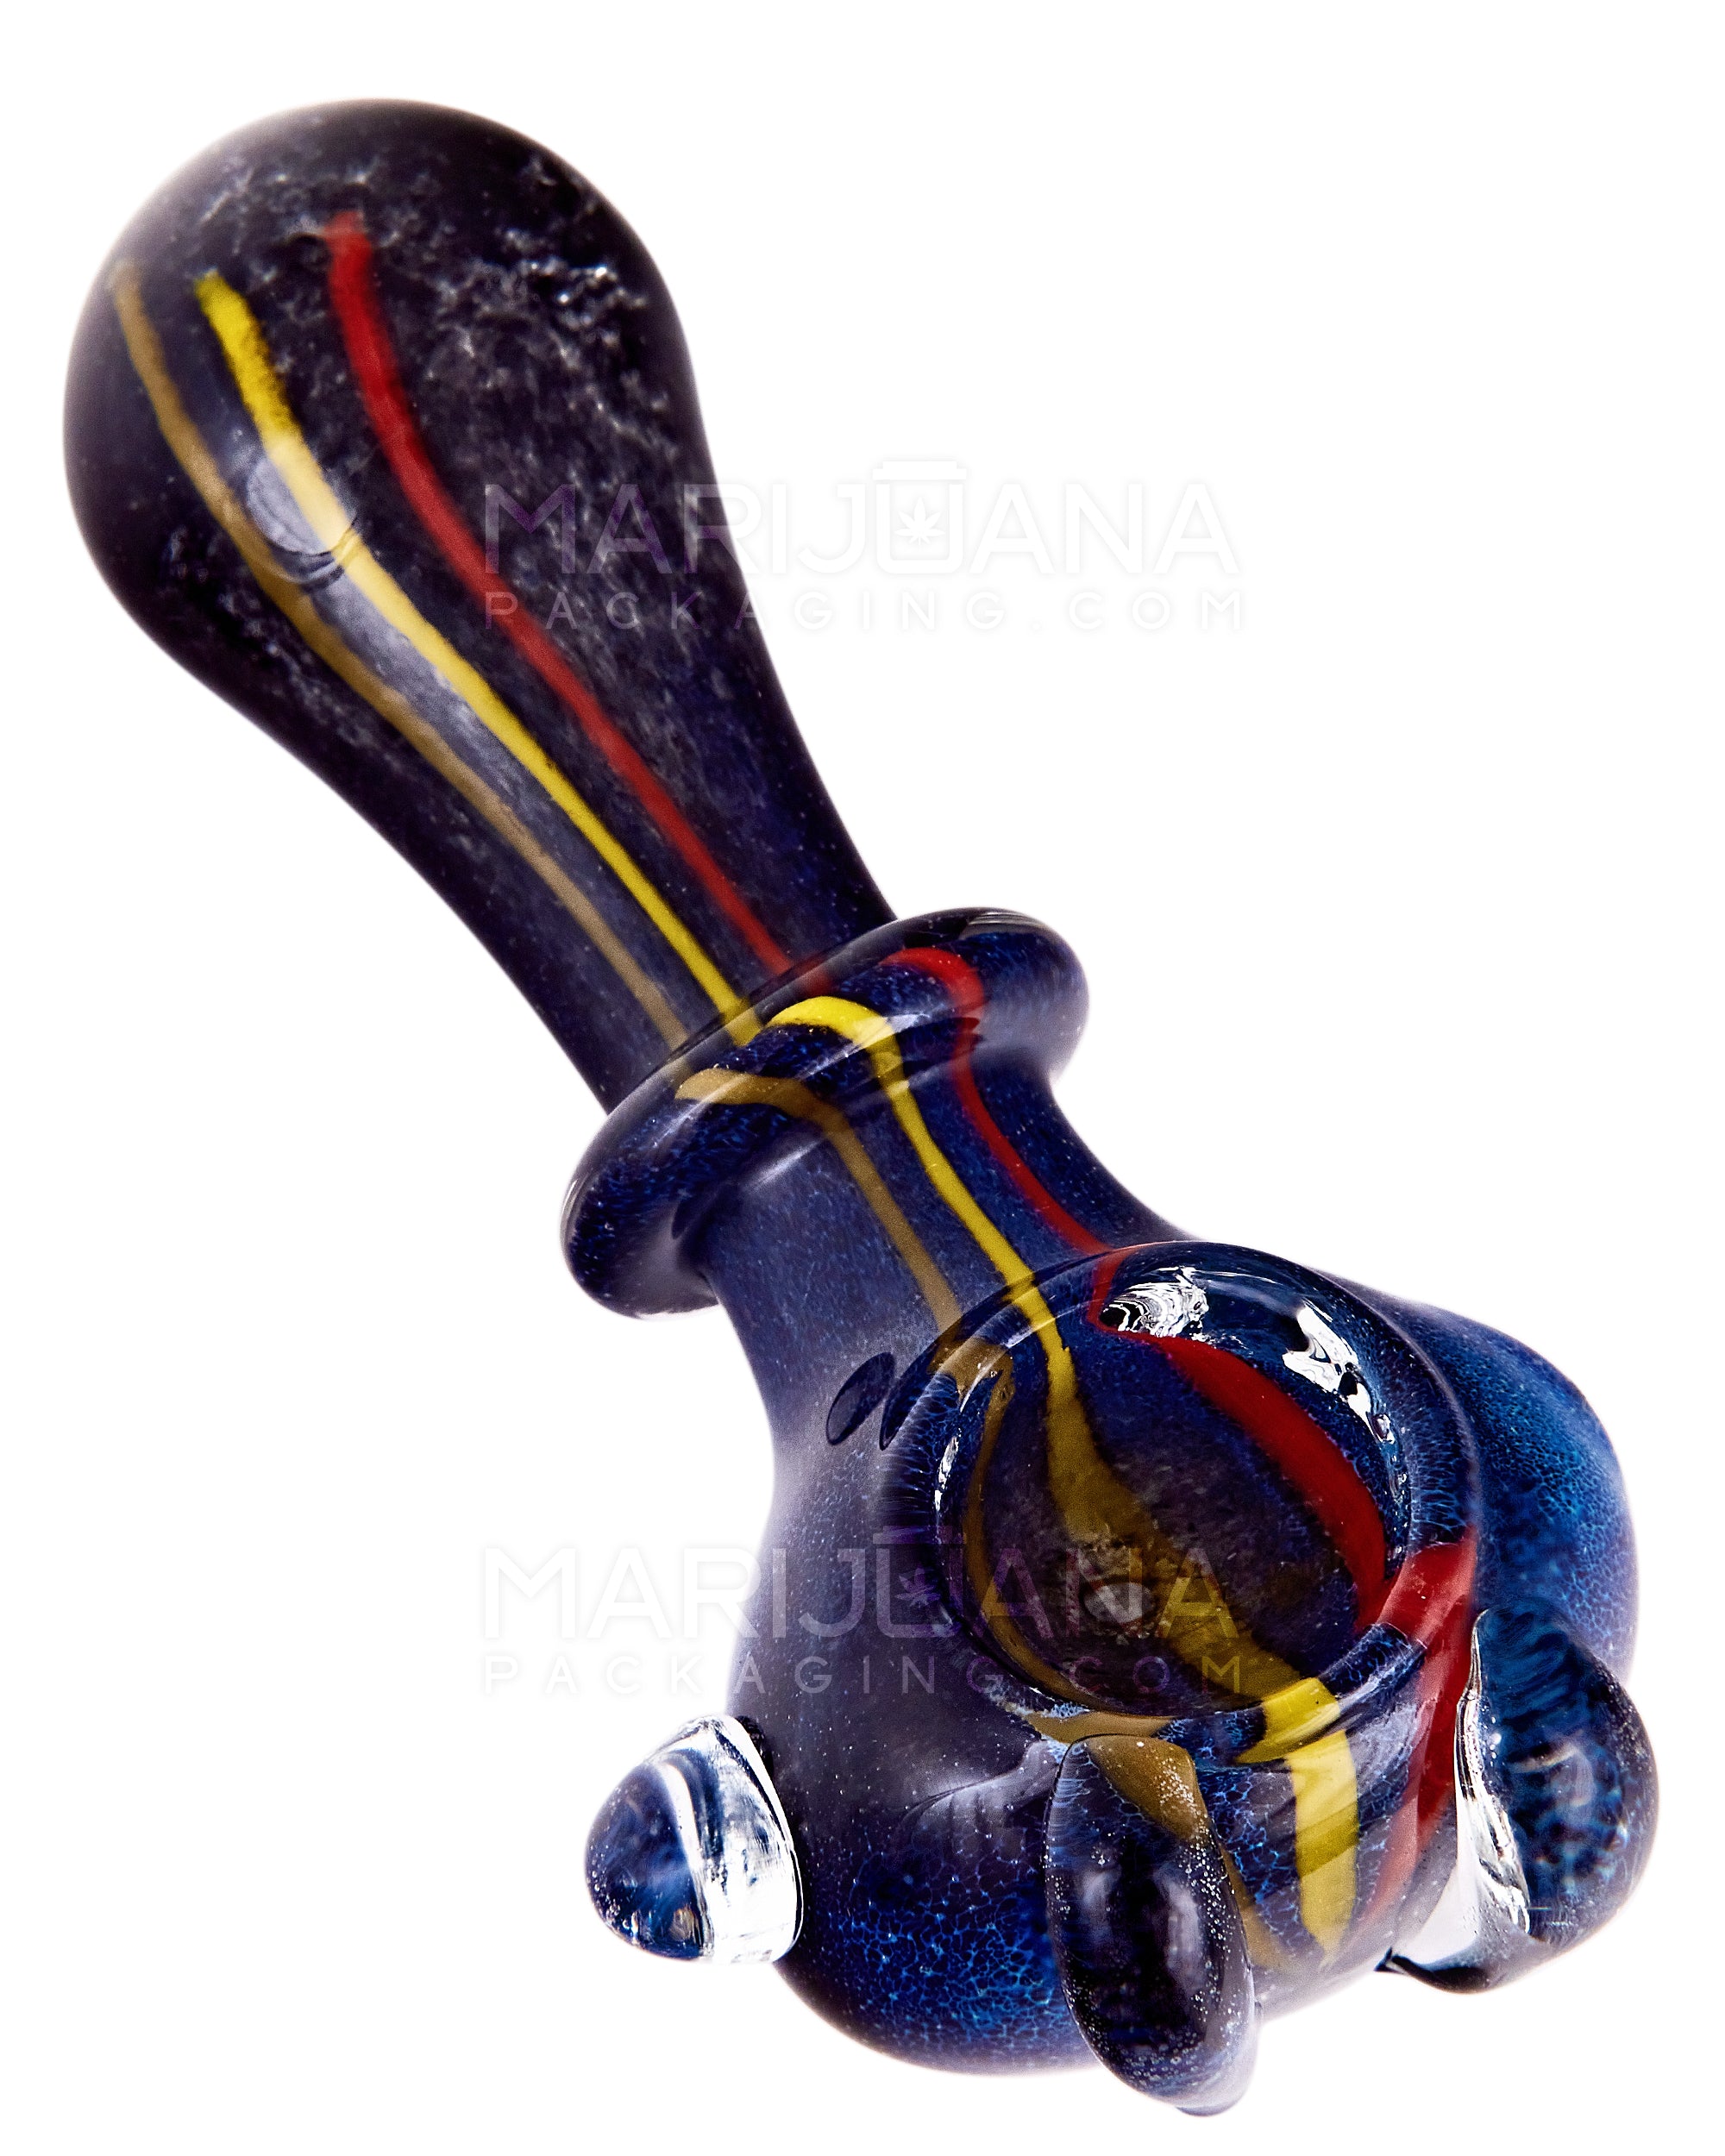 Frit & Striped Ringed Bear Claw Spoon Hand Pipe | 5in Long - Glass - Assorted - 6